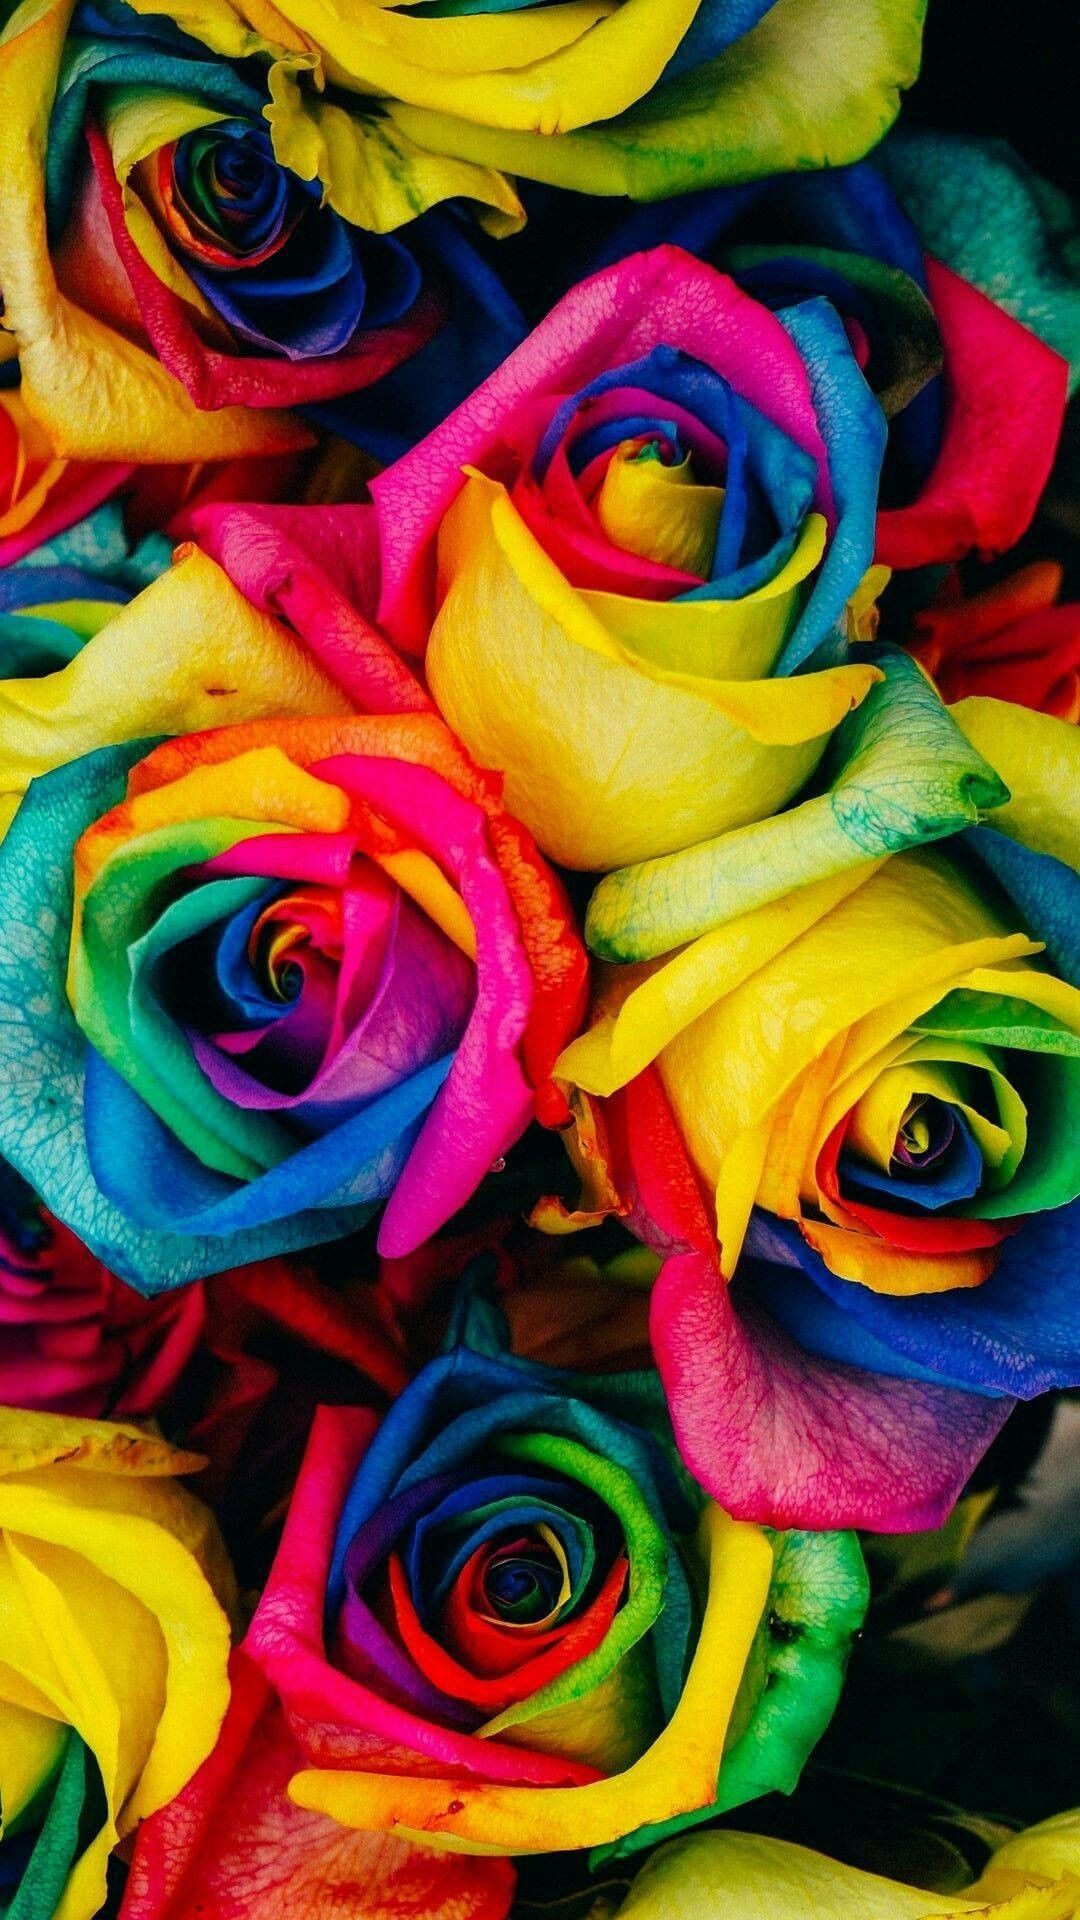 Cute Pictures, Rose Wallpaper, Wallpaper Backgrounds, - Rainbow Roses - HD Wallpaper 